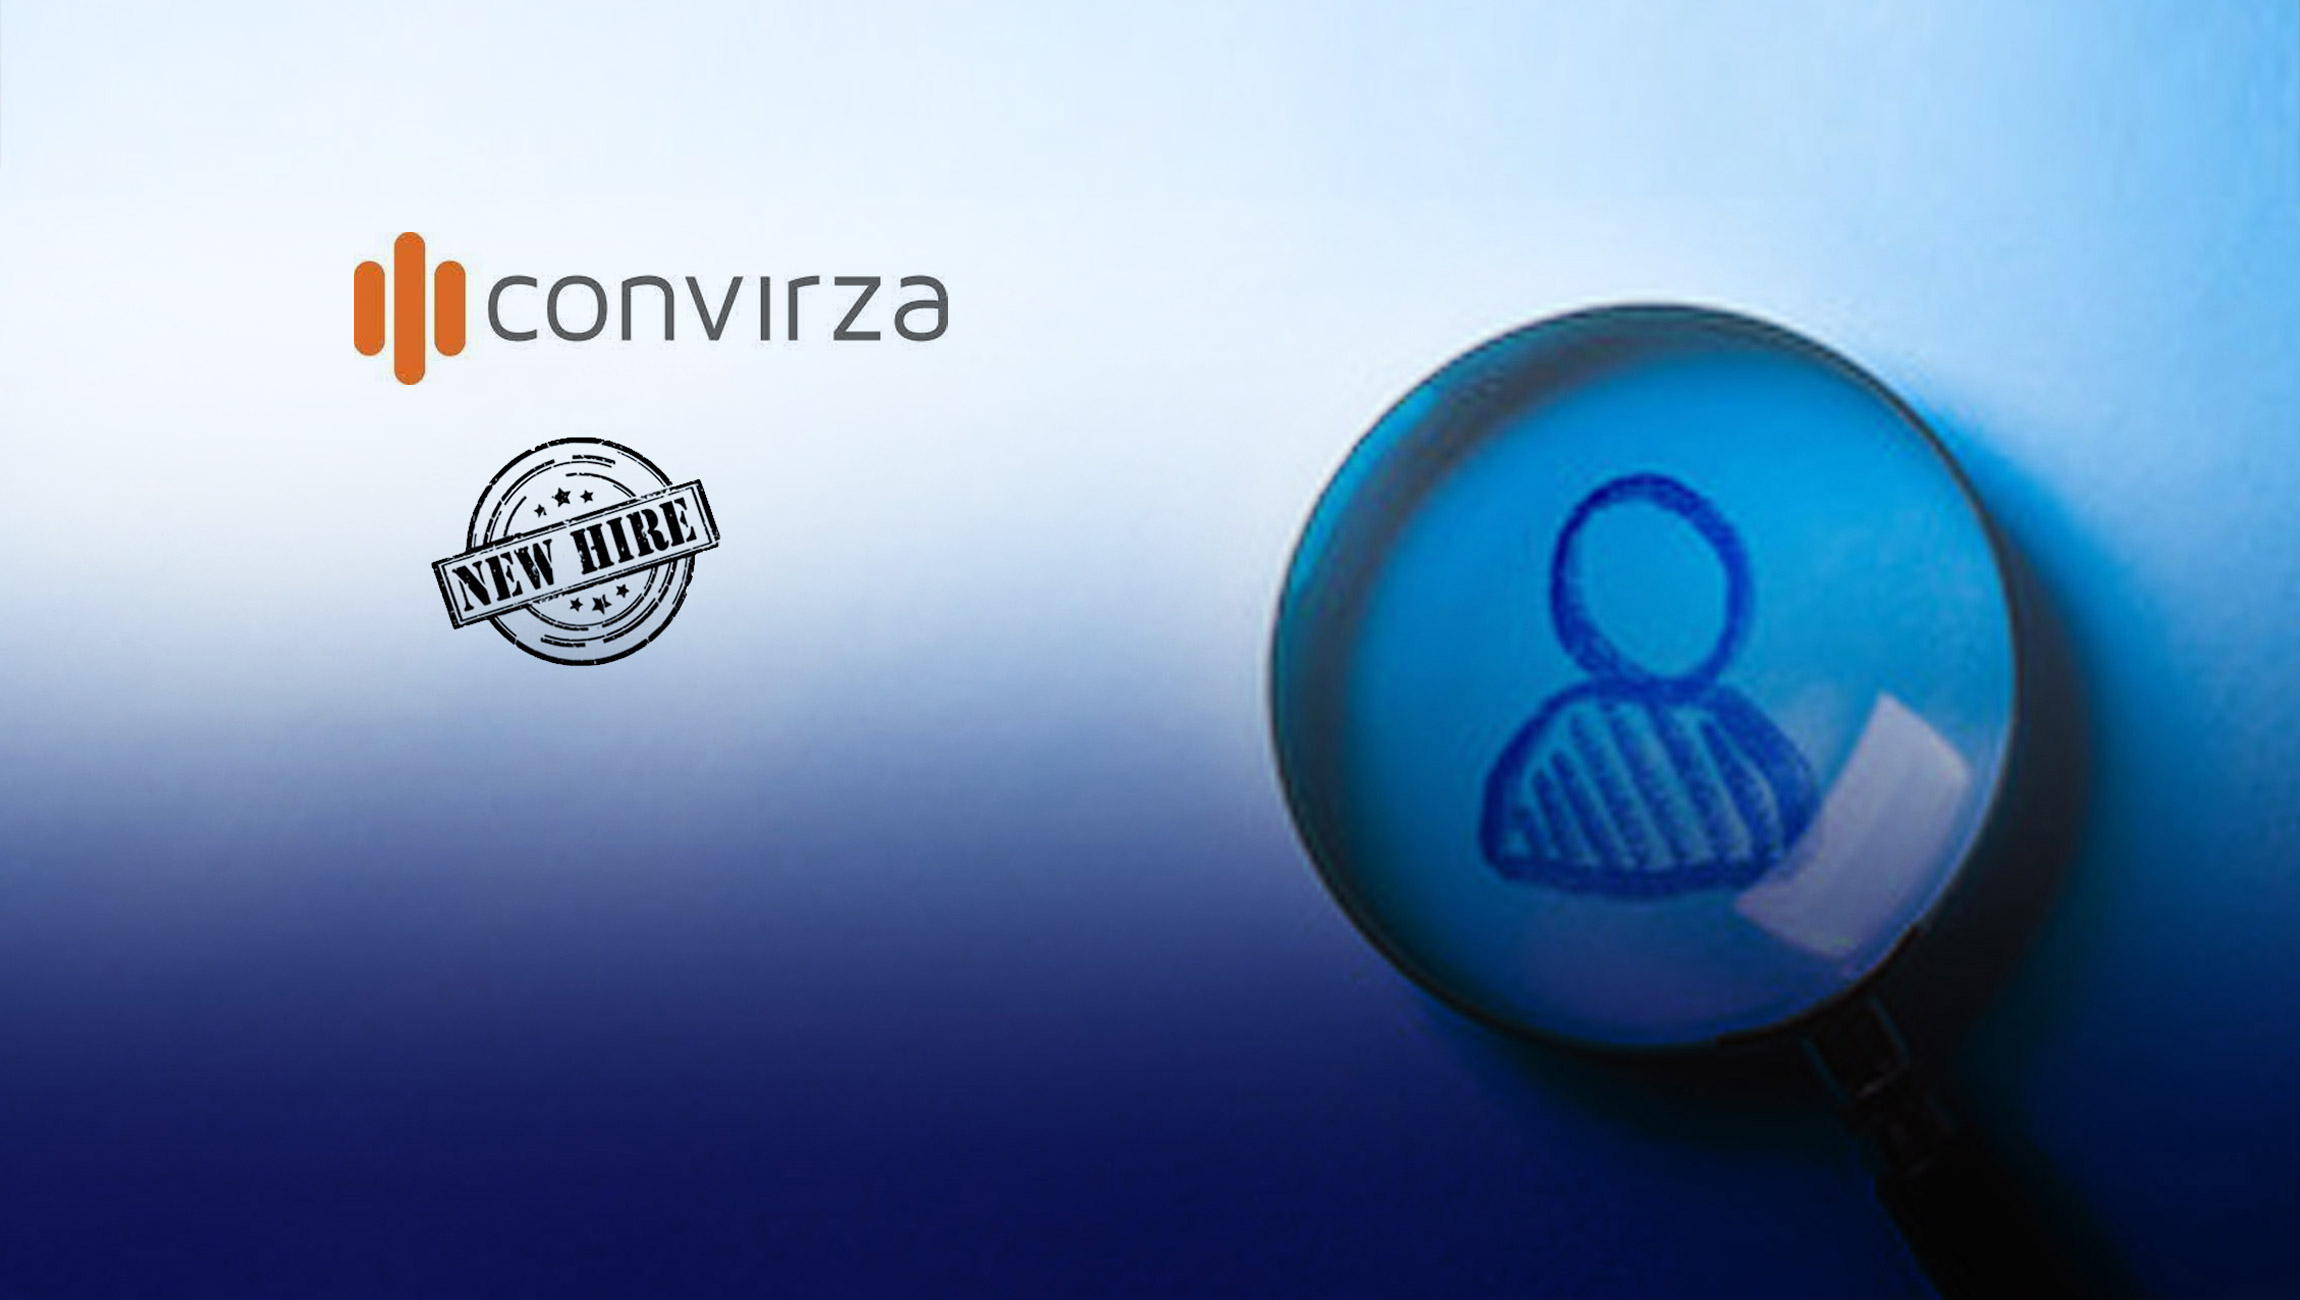 Convirza Appoints New CTO to Accelerate Technology Innovation